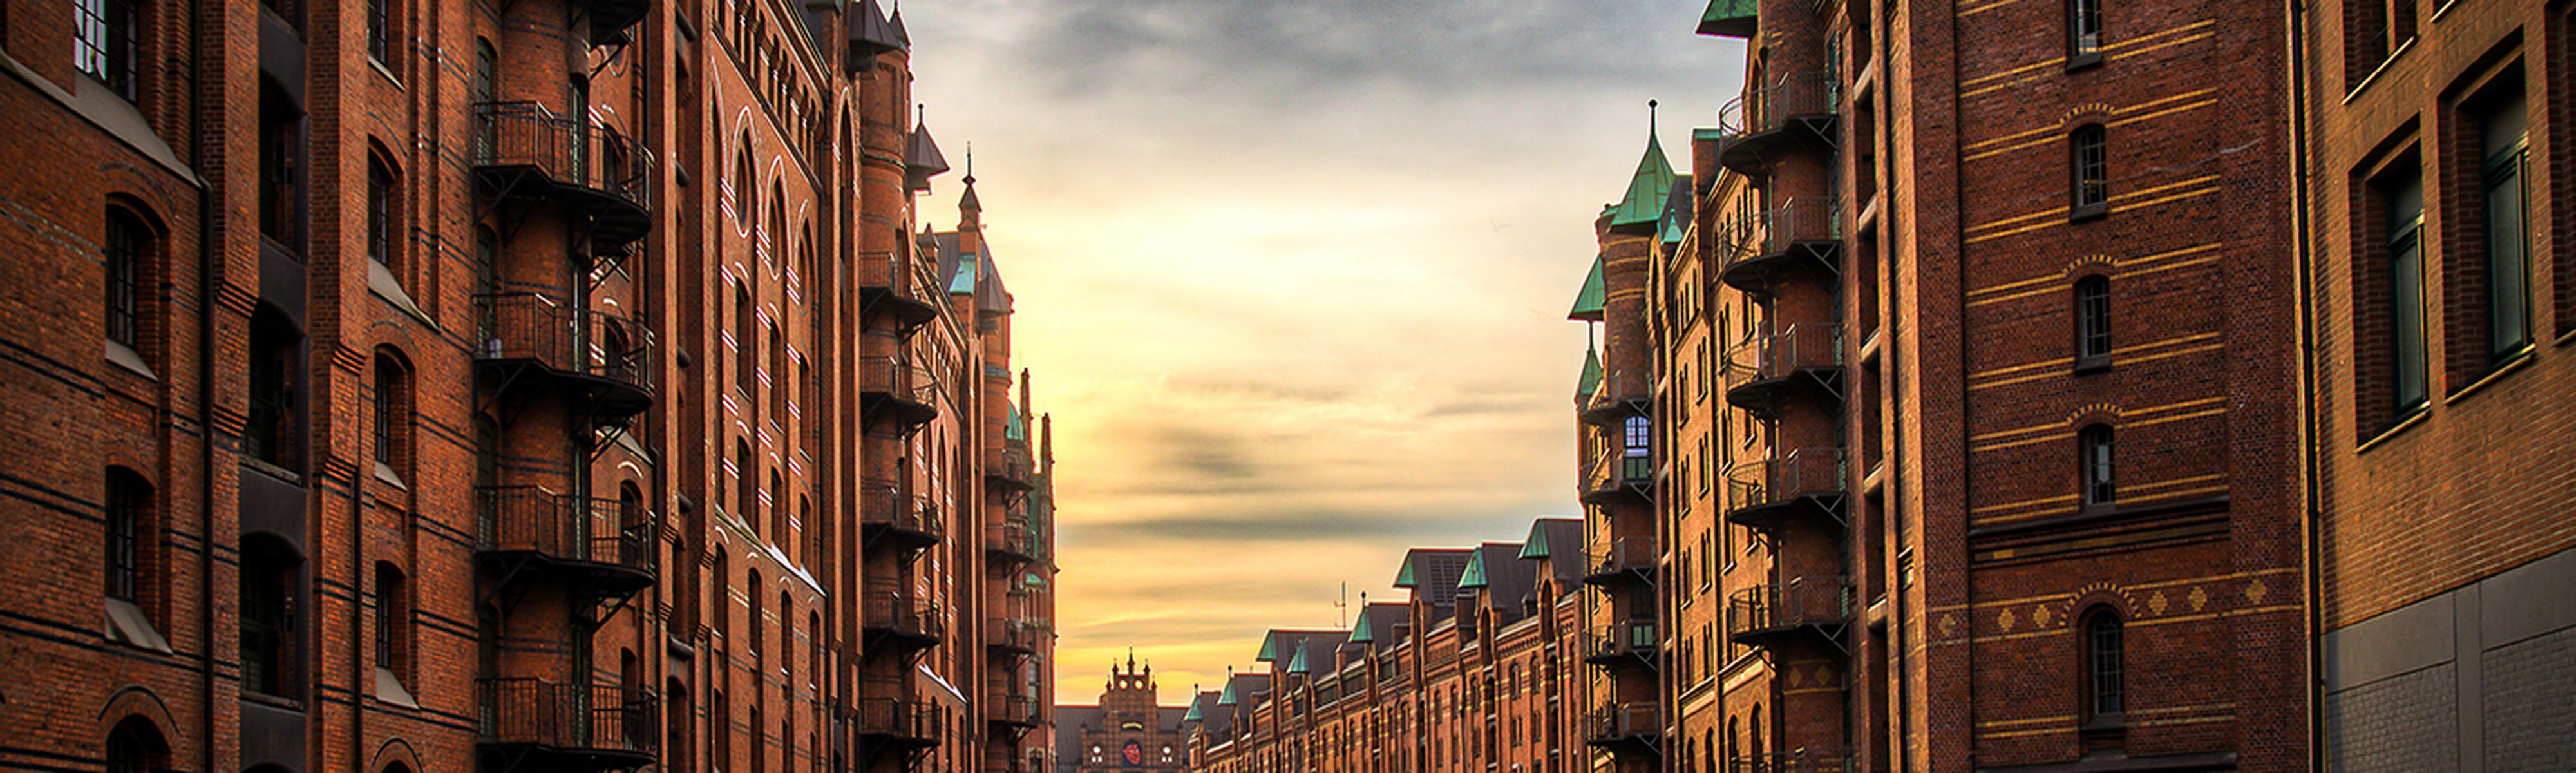 buildings surrounding the river in hamburg germany at sunset